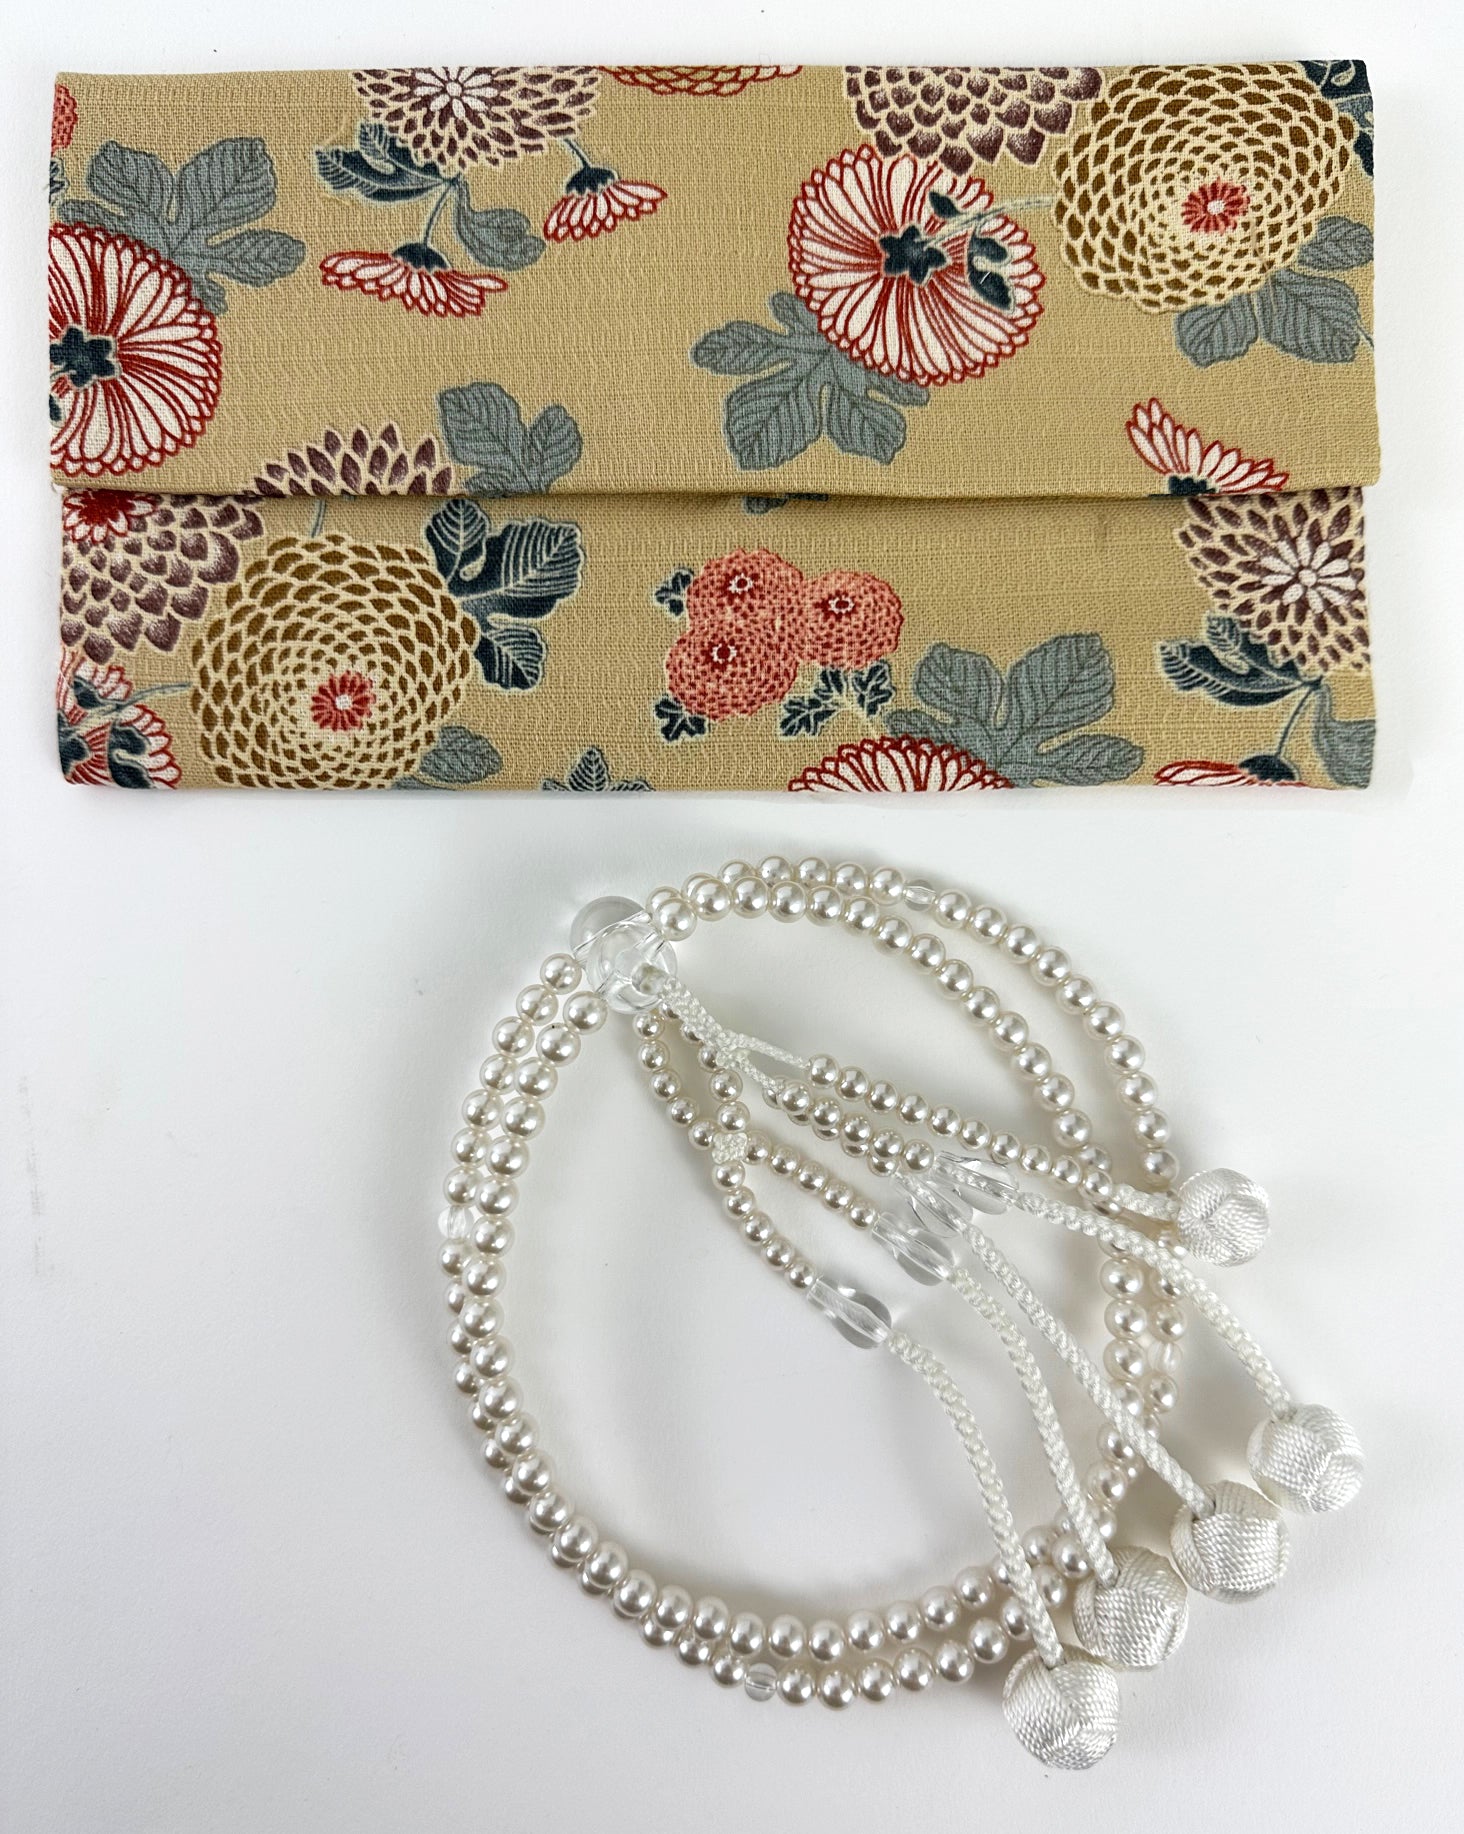 White Pearl Beads with Knitted Tassels Set - Large Beads (Large Beads Case)